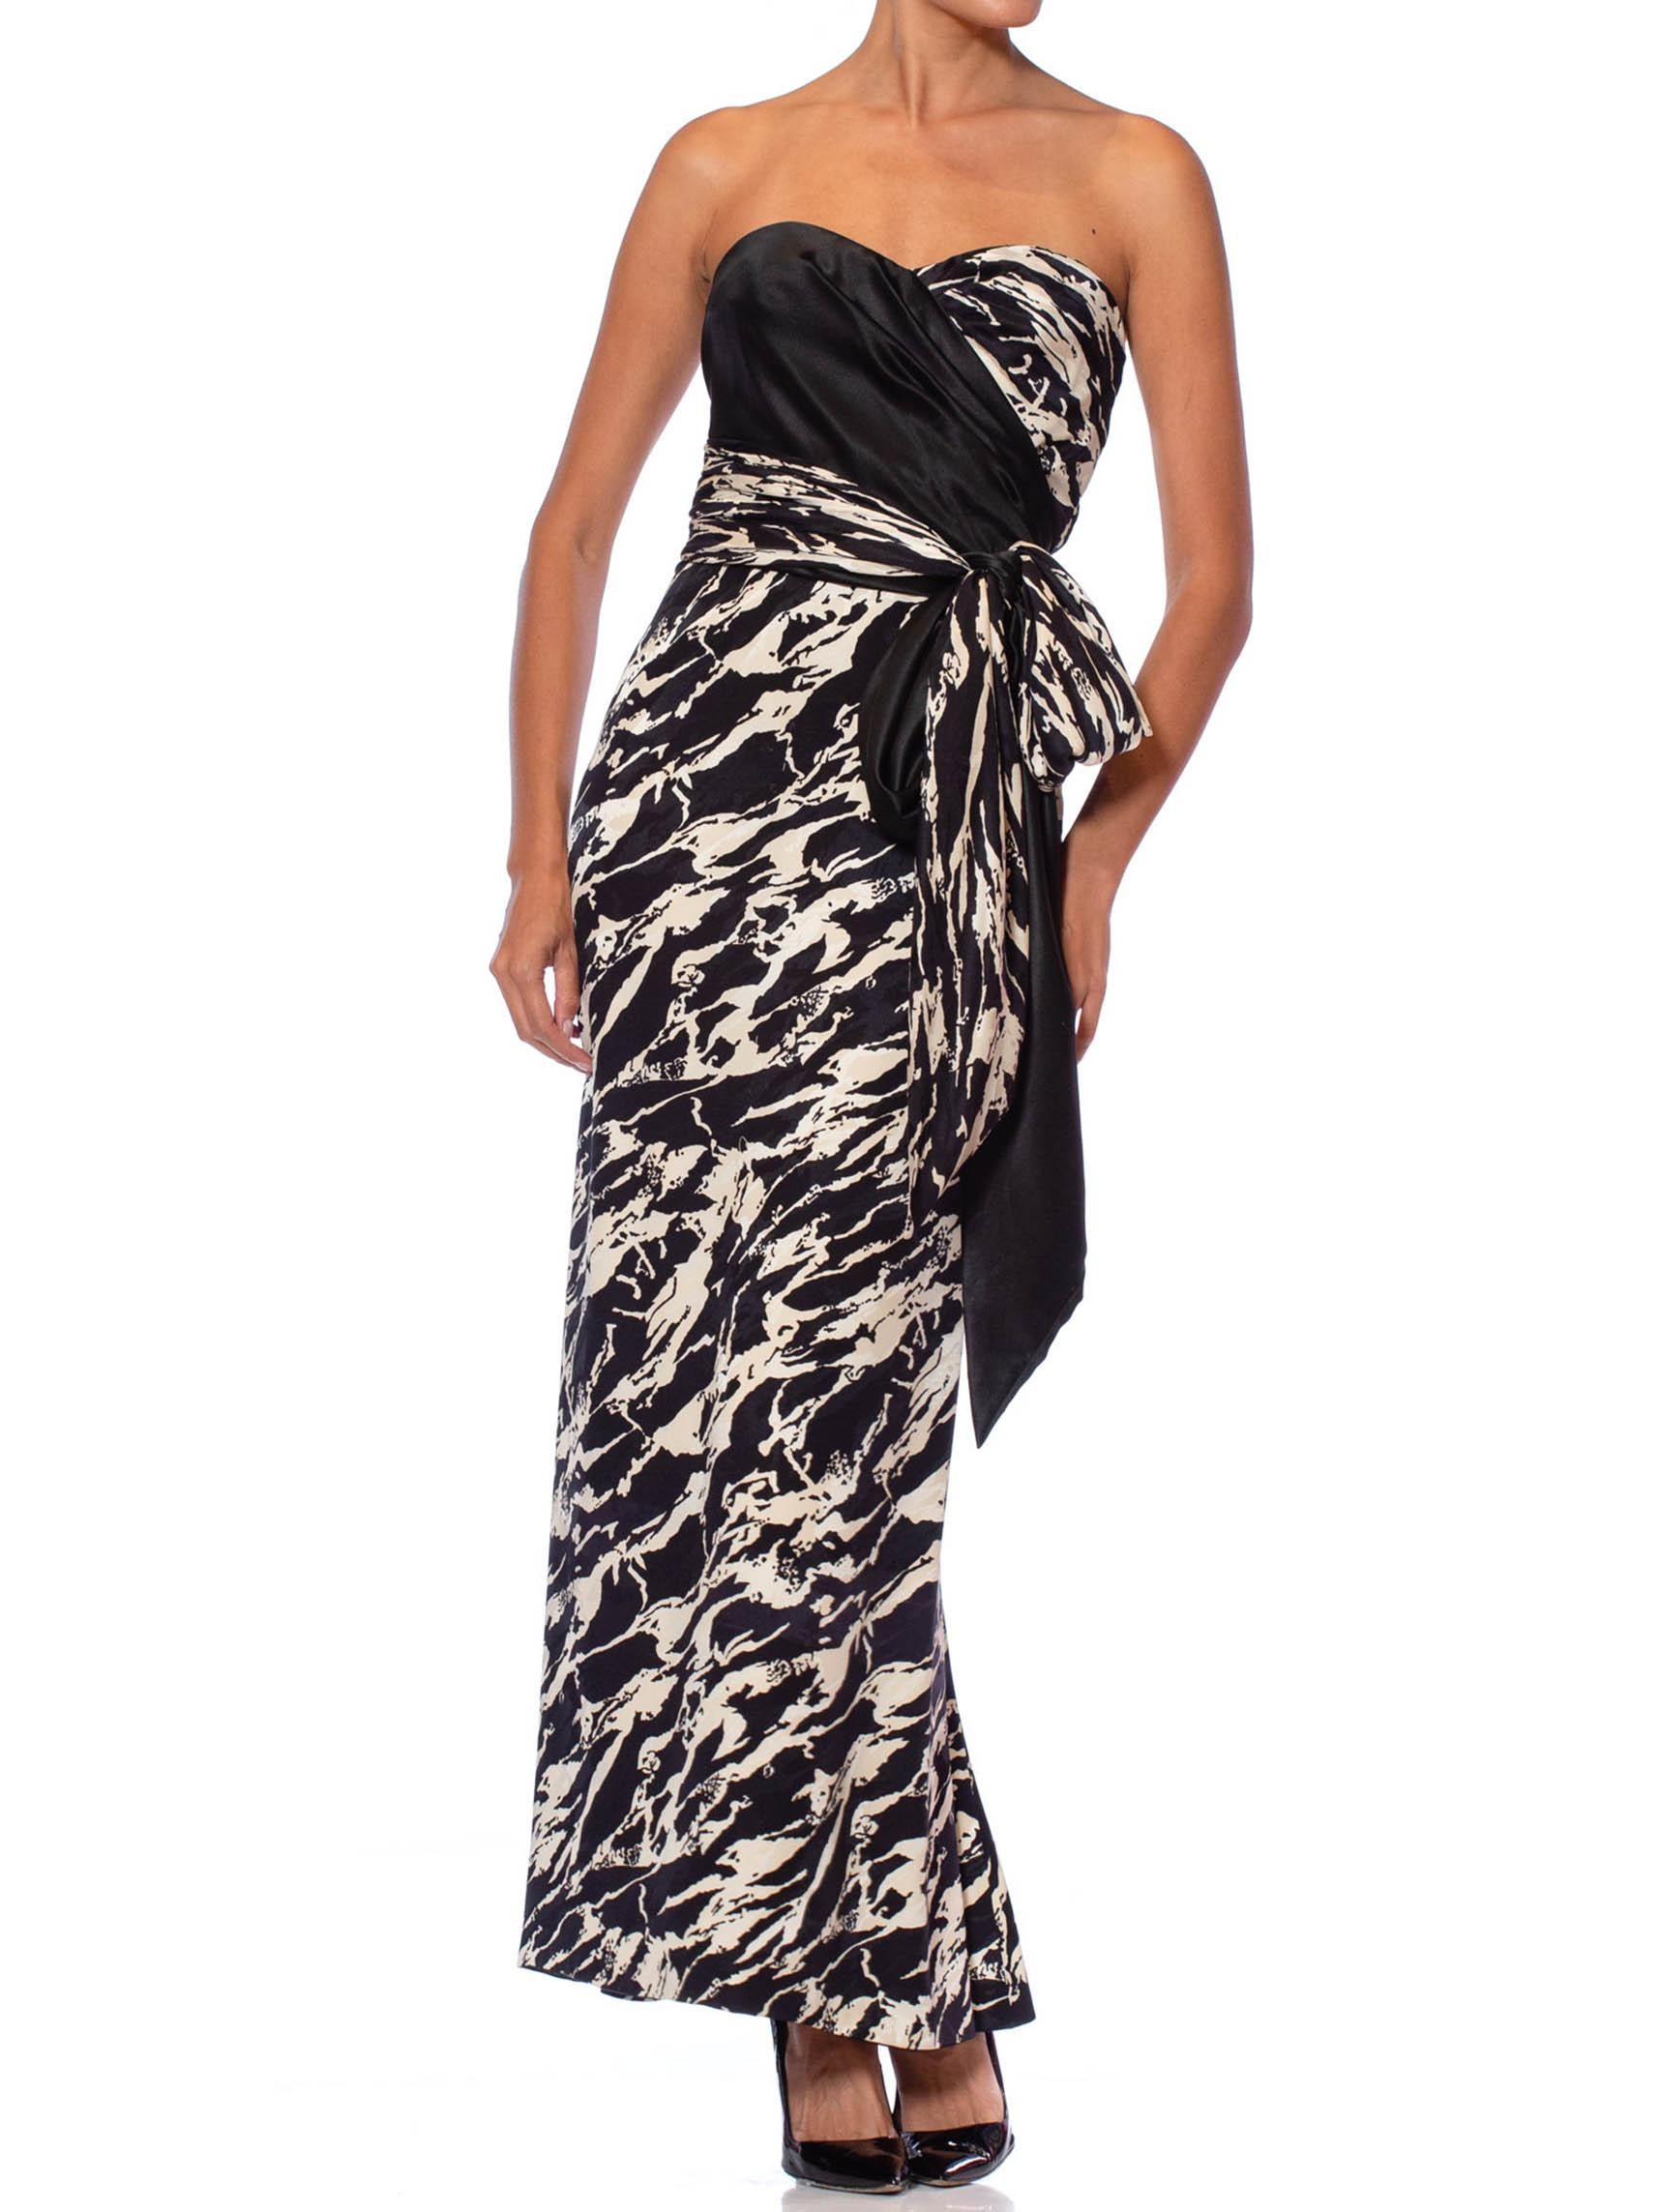 1980S ODICINI COUTURE FOR FRED HAYMAN BEVERLY HILLS Black & White Silk Charmeus For Sale 2